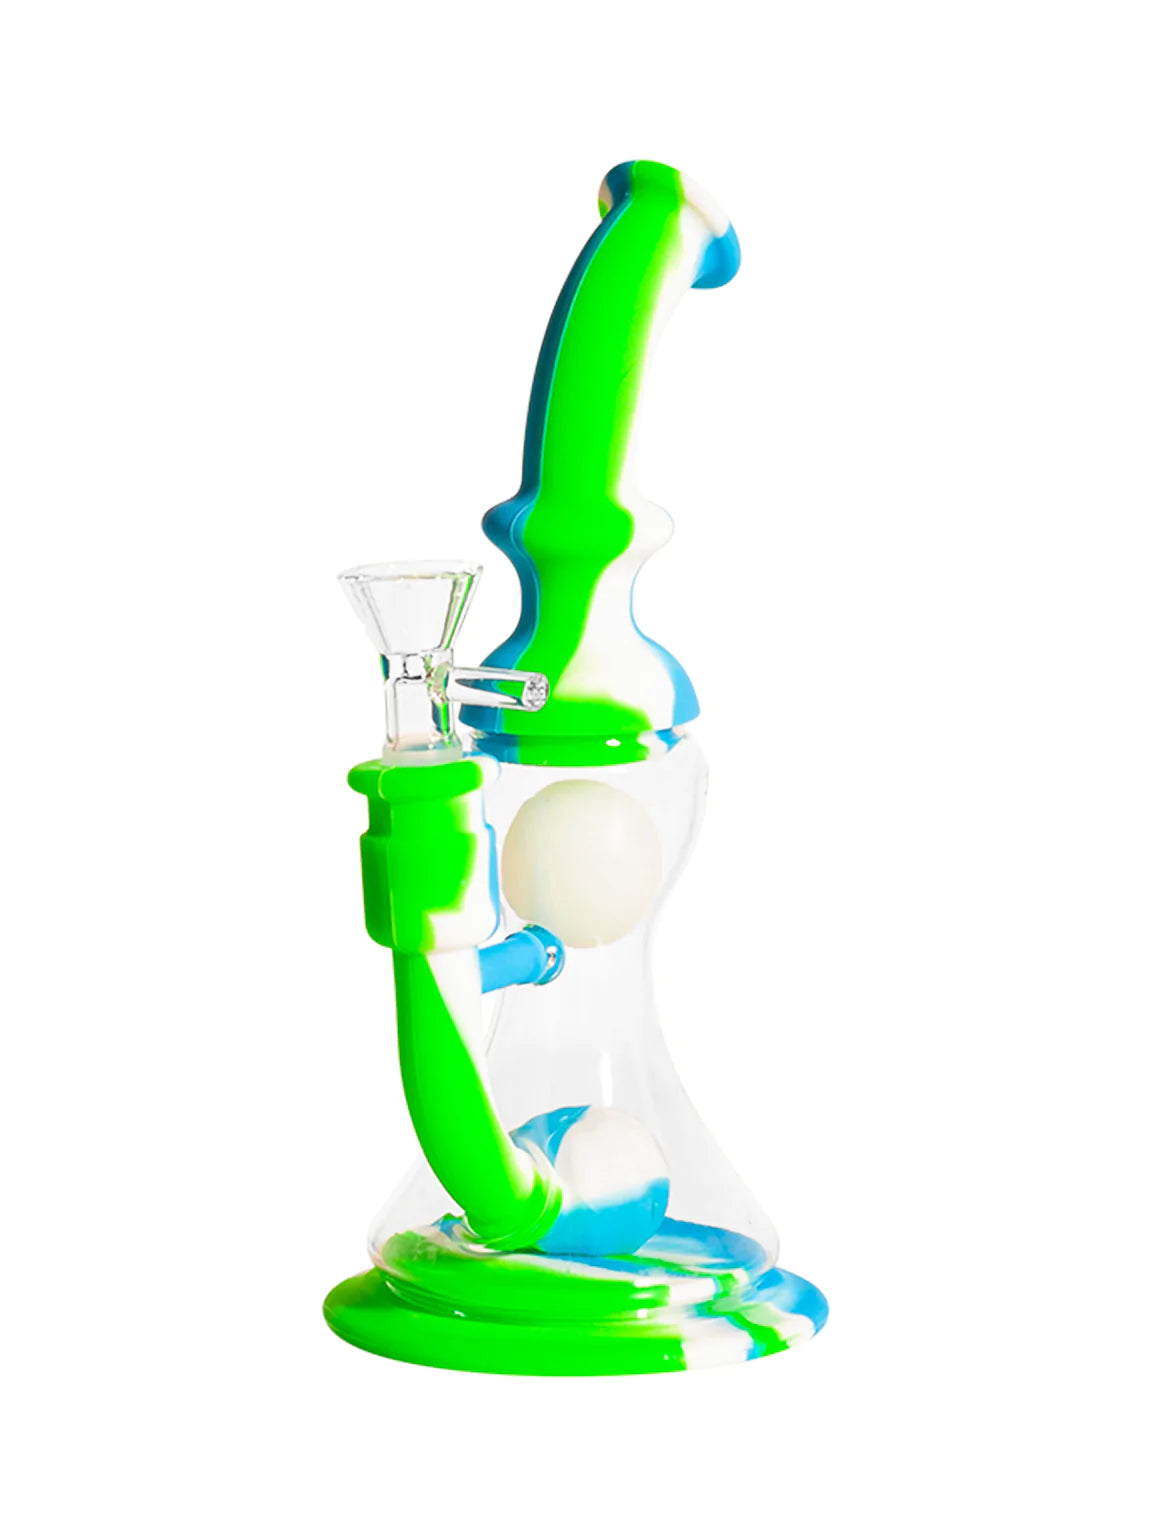 10" Silicone Float Ball Rig